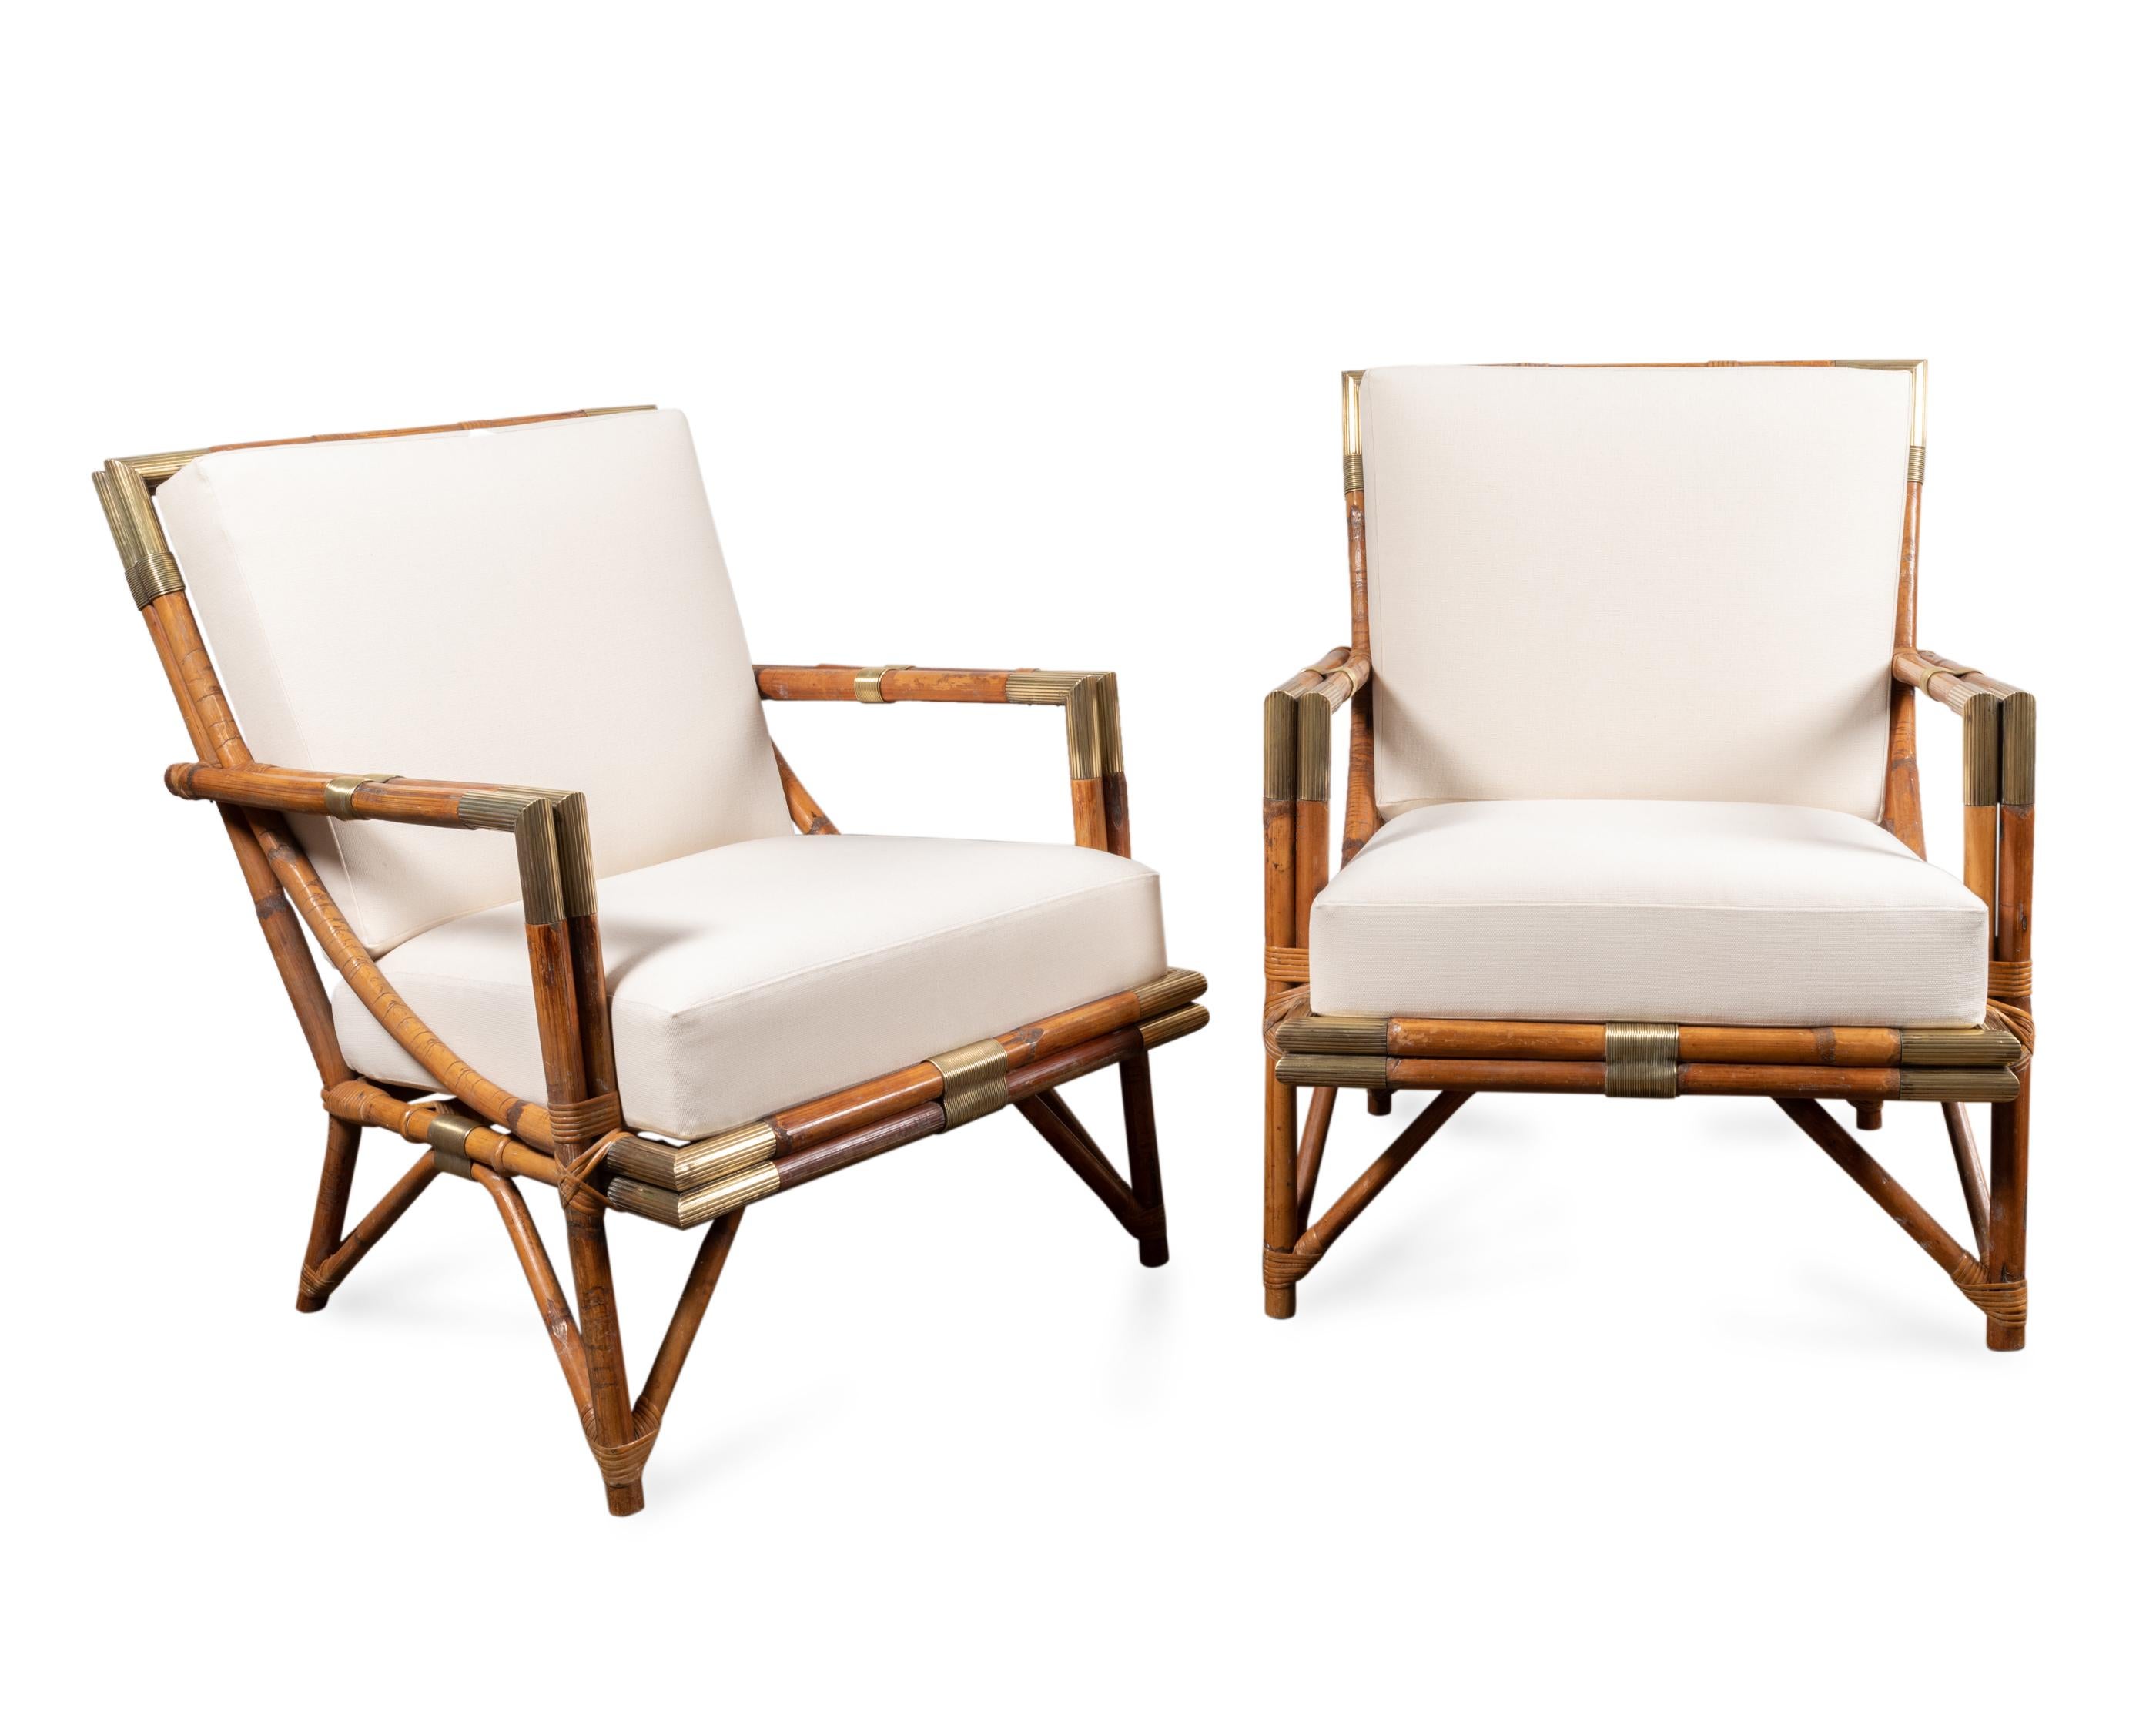 Sofa and lounge chairs set in rattan of Malaca and brass 
One 3-seat sofa and a pair of lounge chairs.
Two removable cushions. newly re upholstered in ecru cotton.
Design: Gilles Sermadiras and Jean Dive for Maison et Jardin, 1955,
France, circa